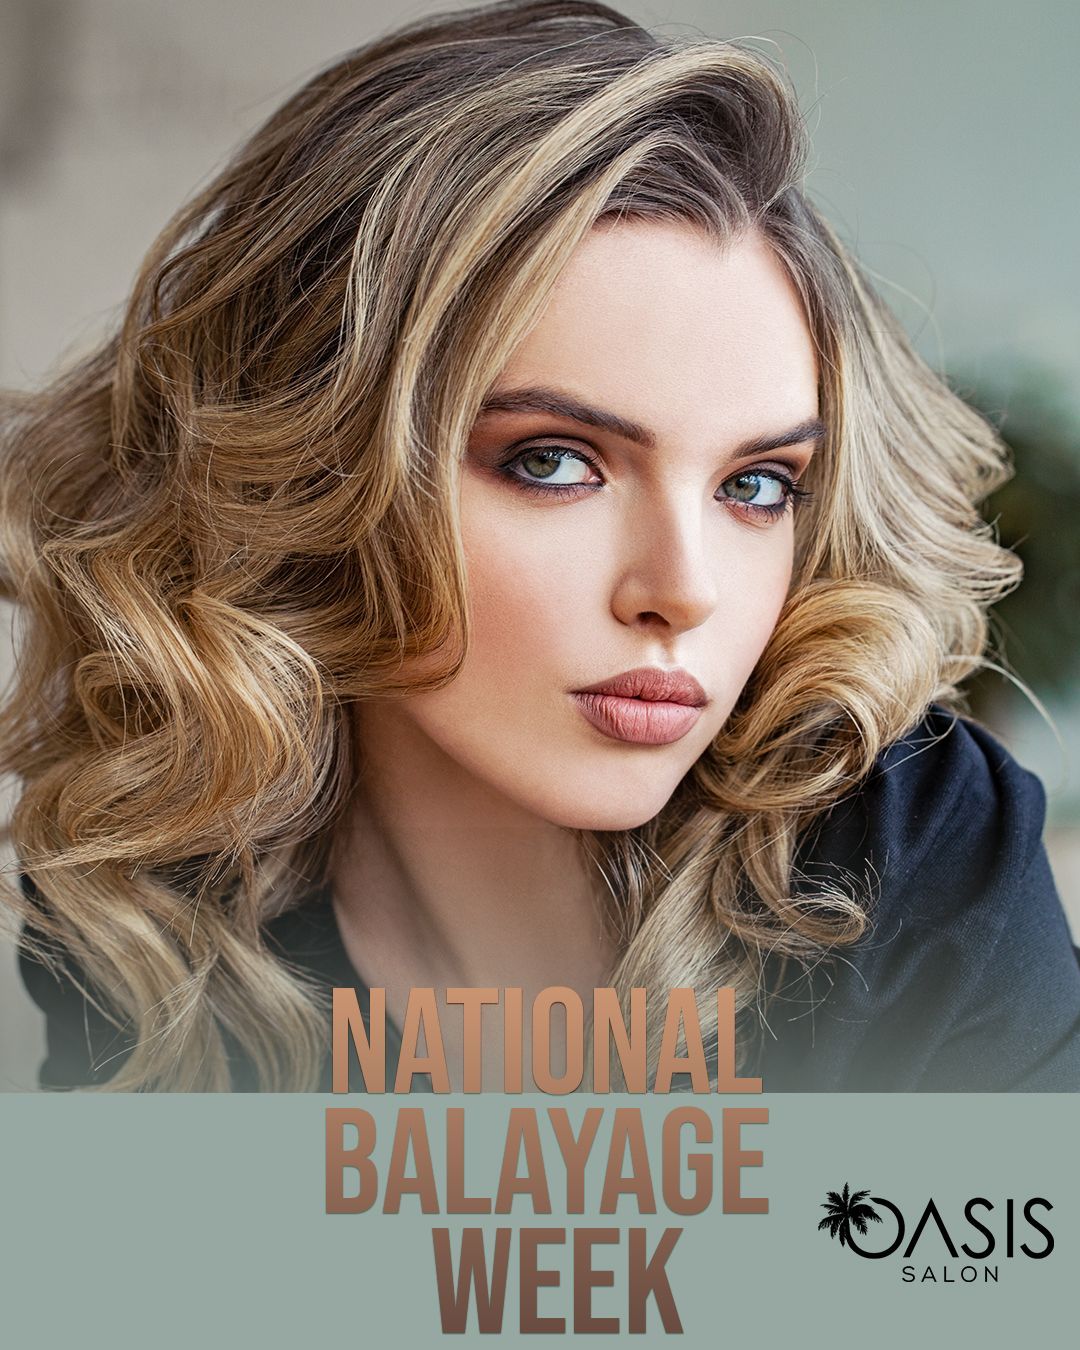 A poster for national balayage week shows a woman with blonde hair